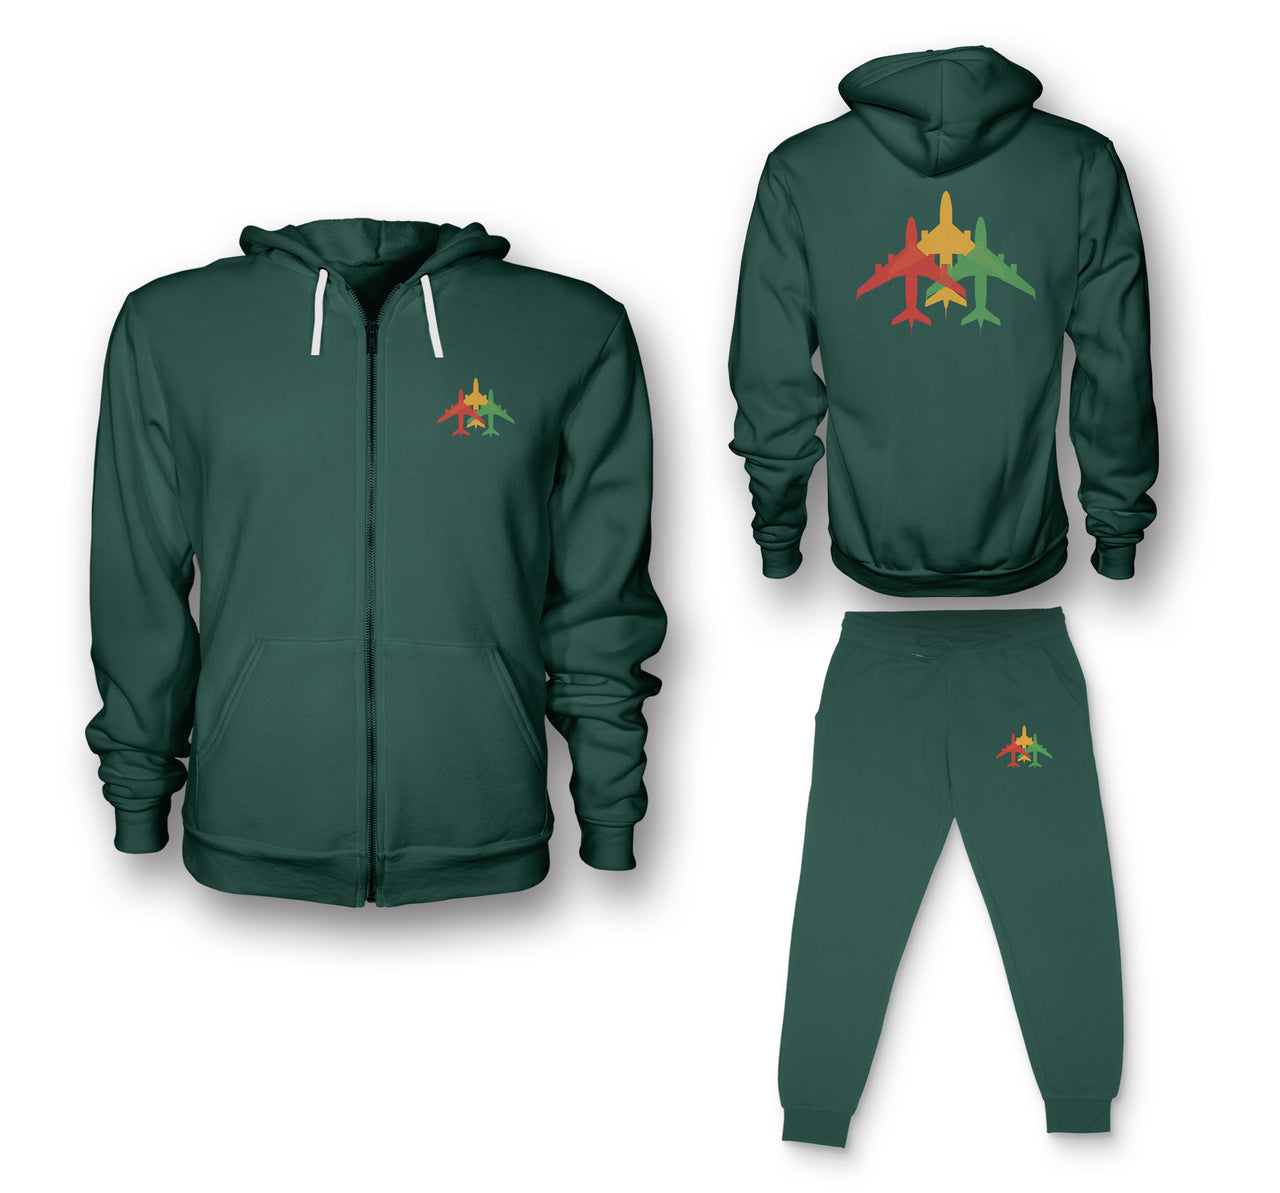 Colourful 3 Airplanes Designed Zipped Hoodies & Sweatpants Set